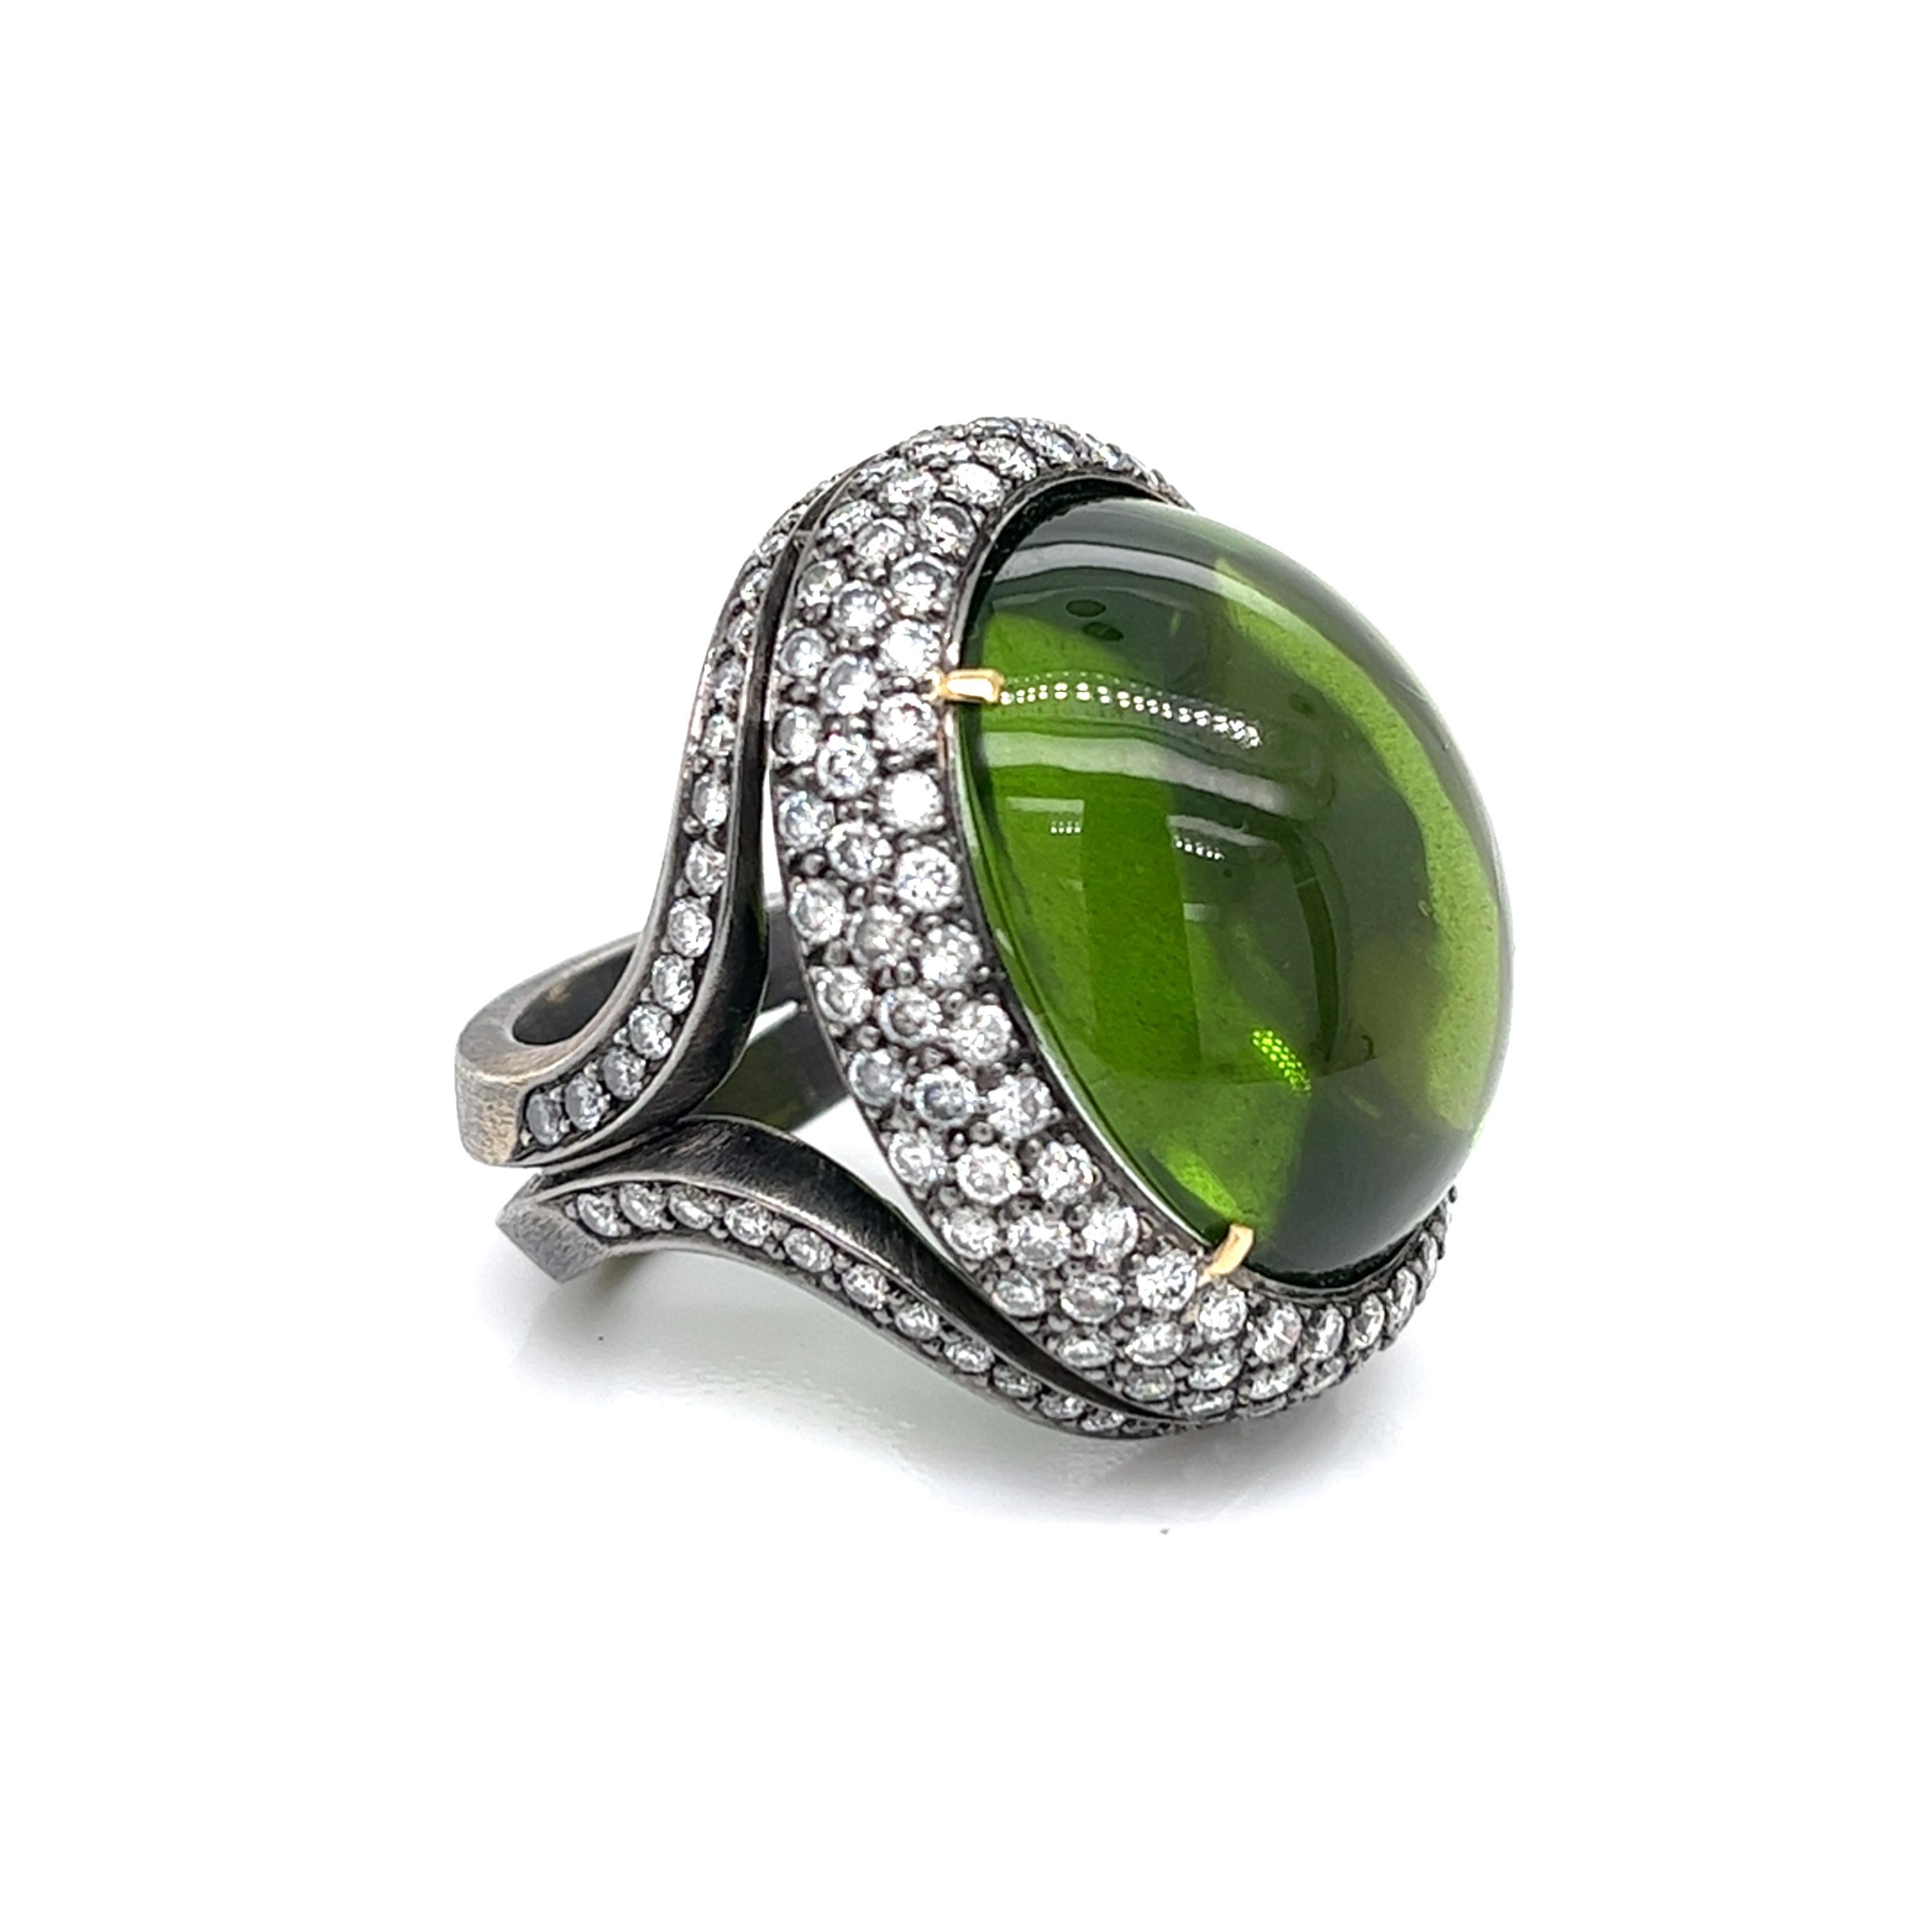 This exquisite piece features an 18kt white gold unique design with a striking black rhodium, with center showcasing a top-quality peridot in an oval cabochon cut. The gem is elegantly surrounded by 174 dazzling pave-set diamonds, creating a truly